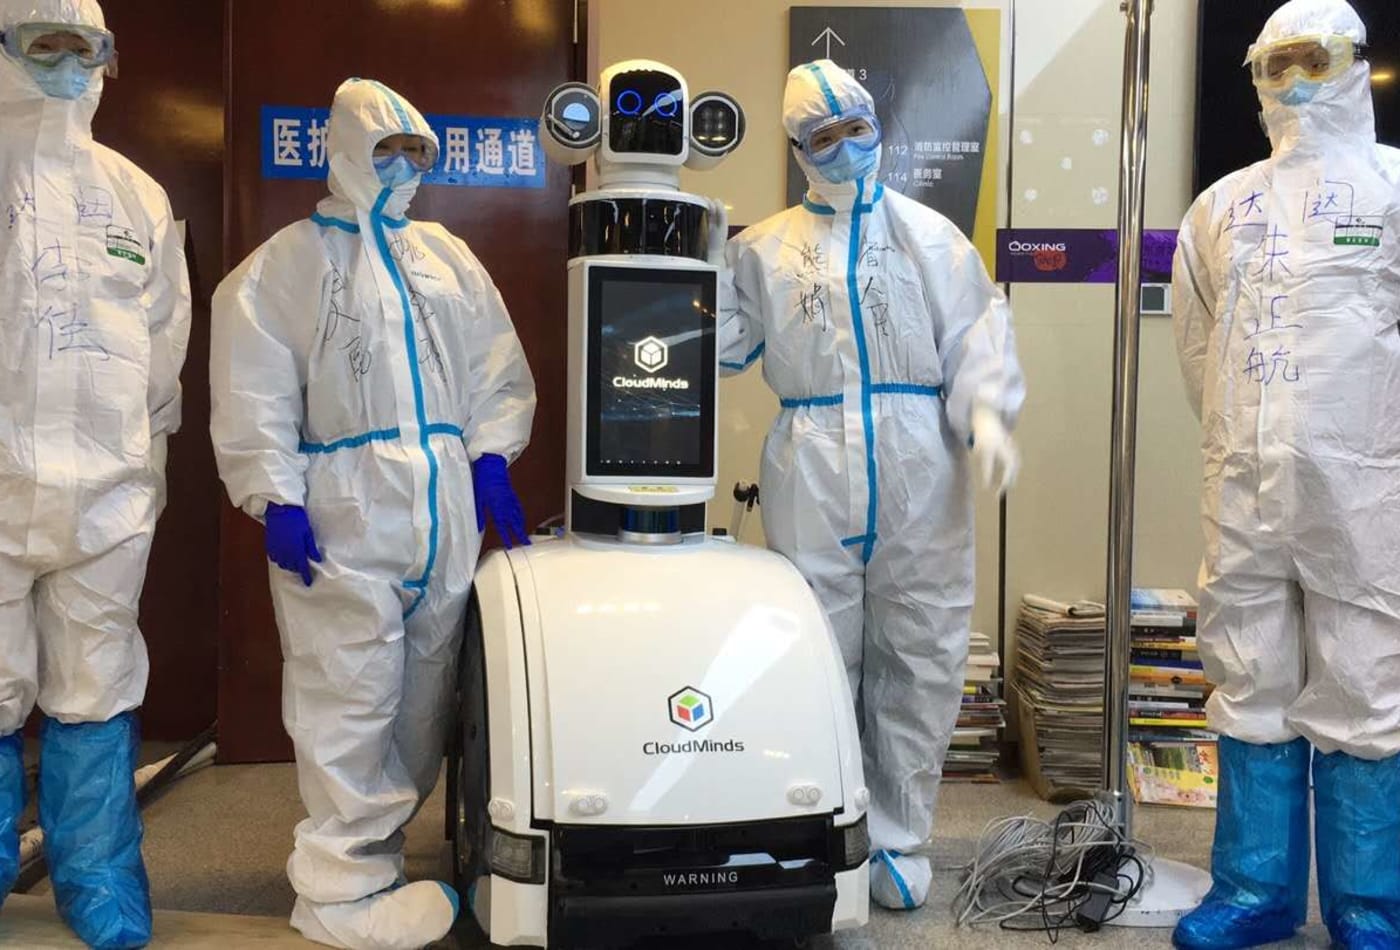 Healthcare workers in hazmat suits standing beside a robot designed to help them monitor Covid-19 patients.